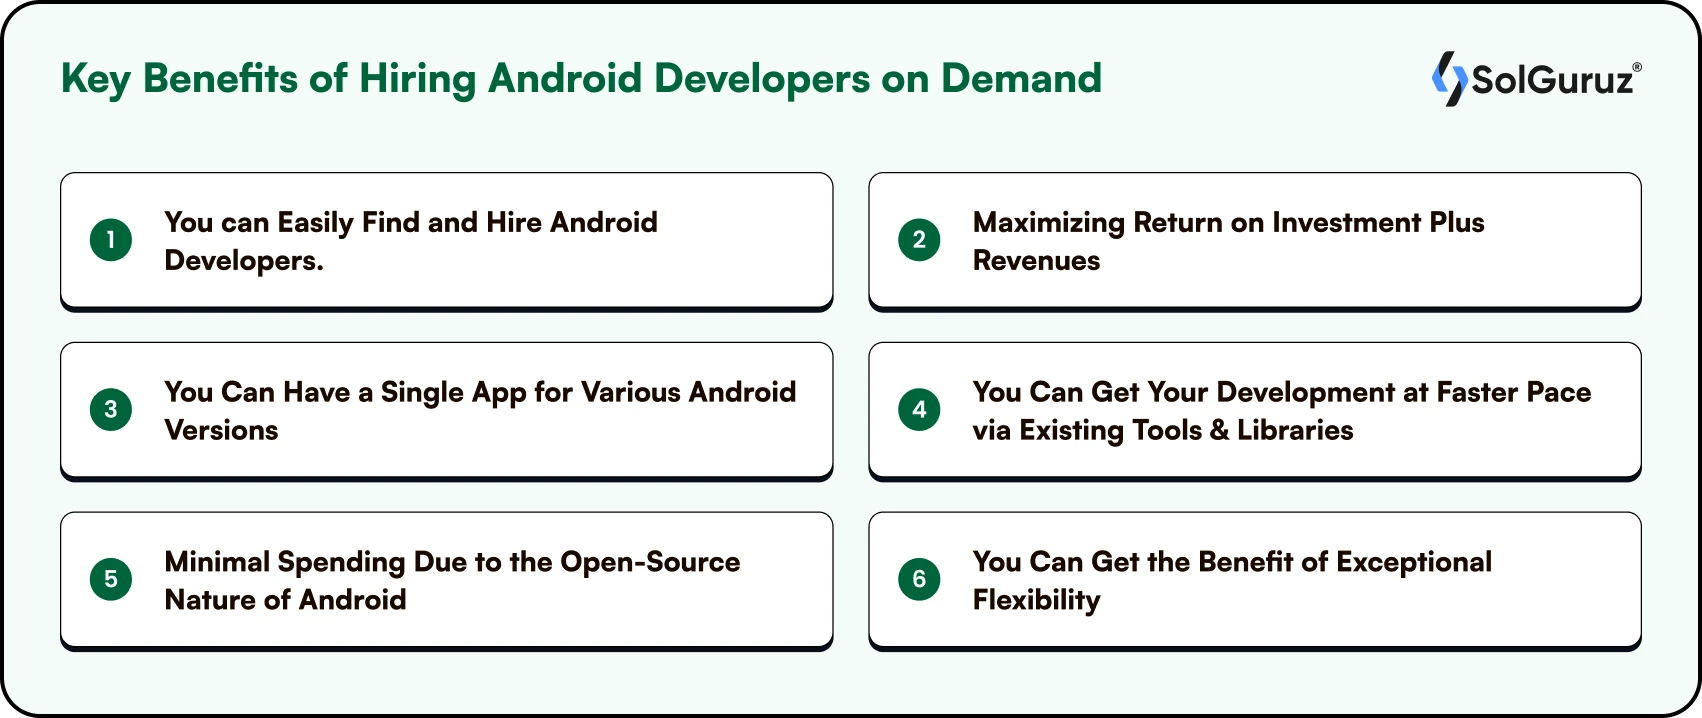 Key Benefits of Hiring Android Developers on Demand - Contract